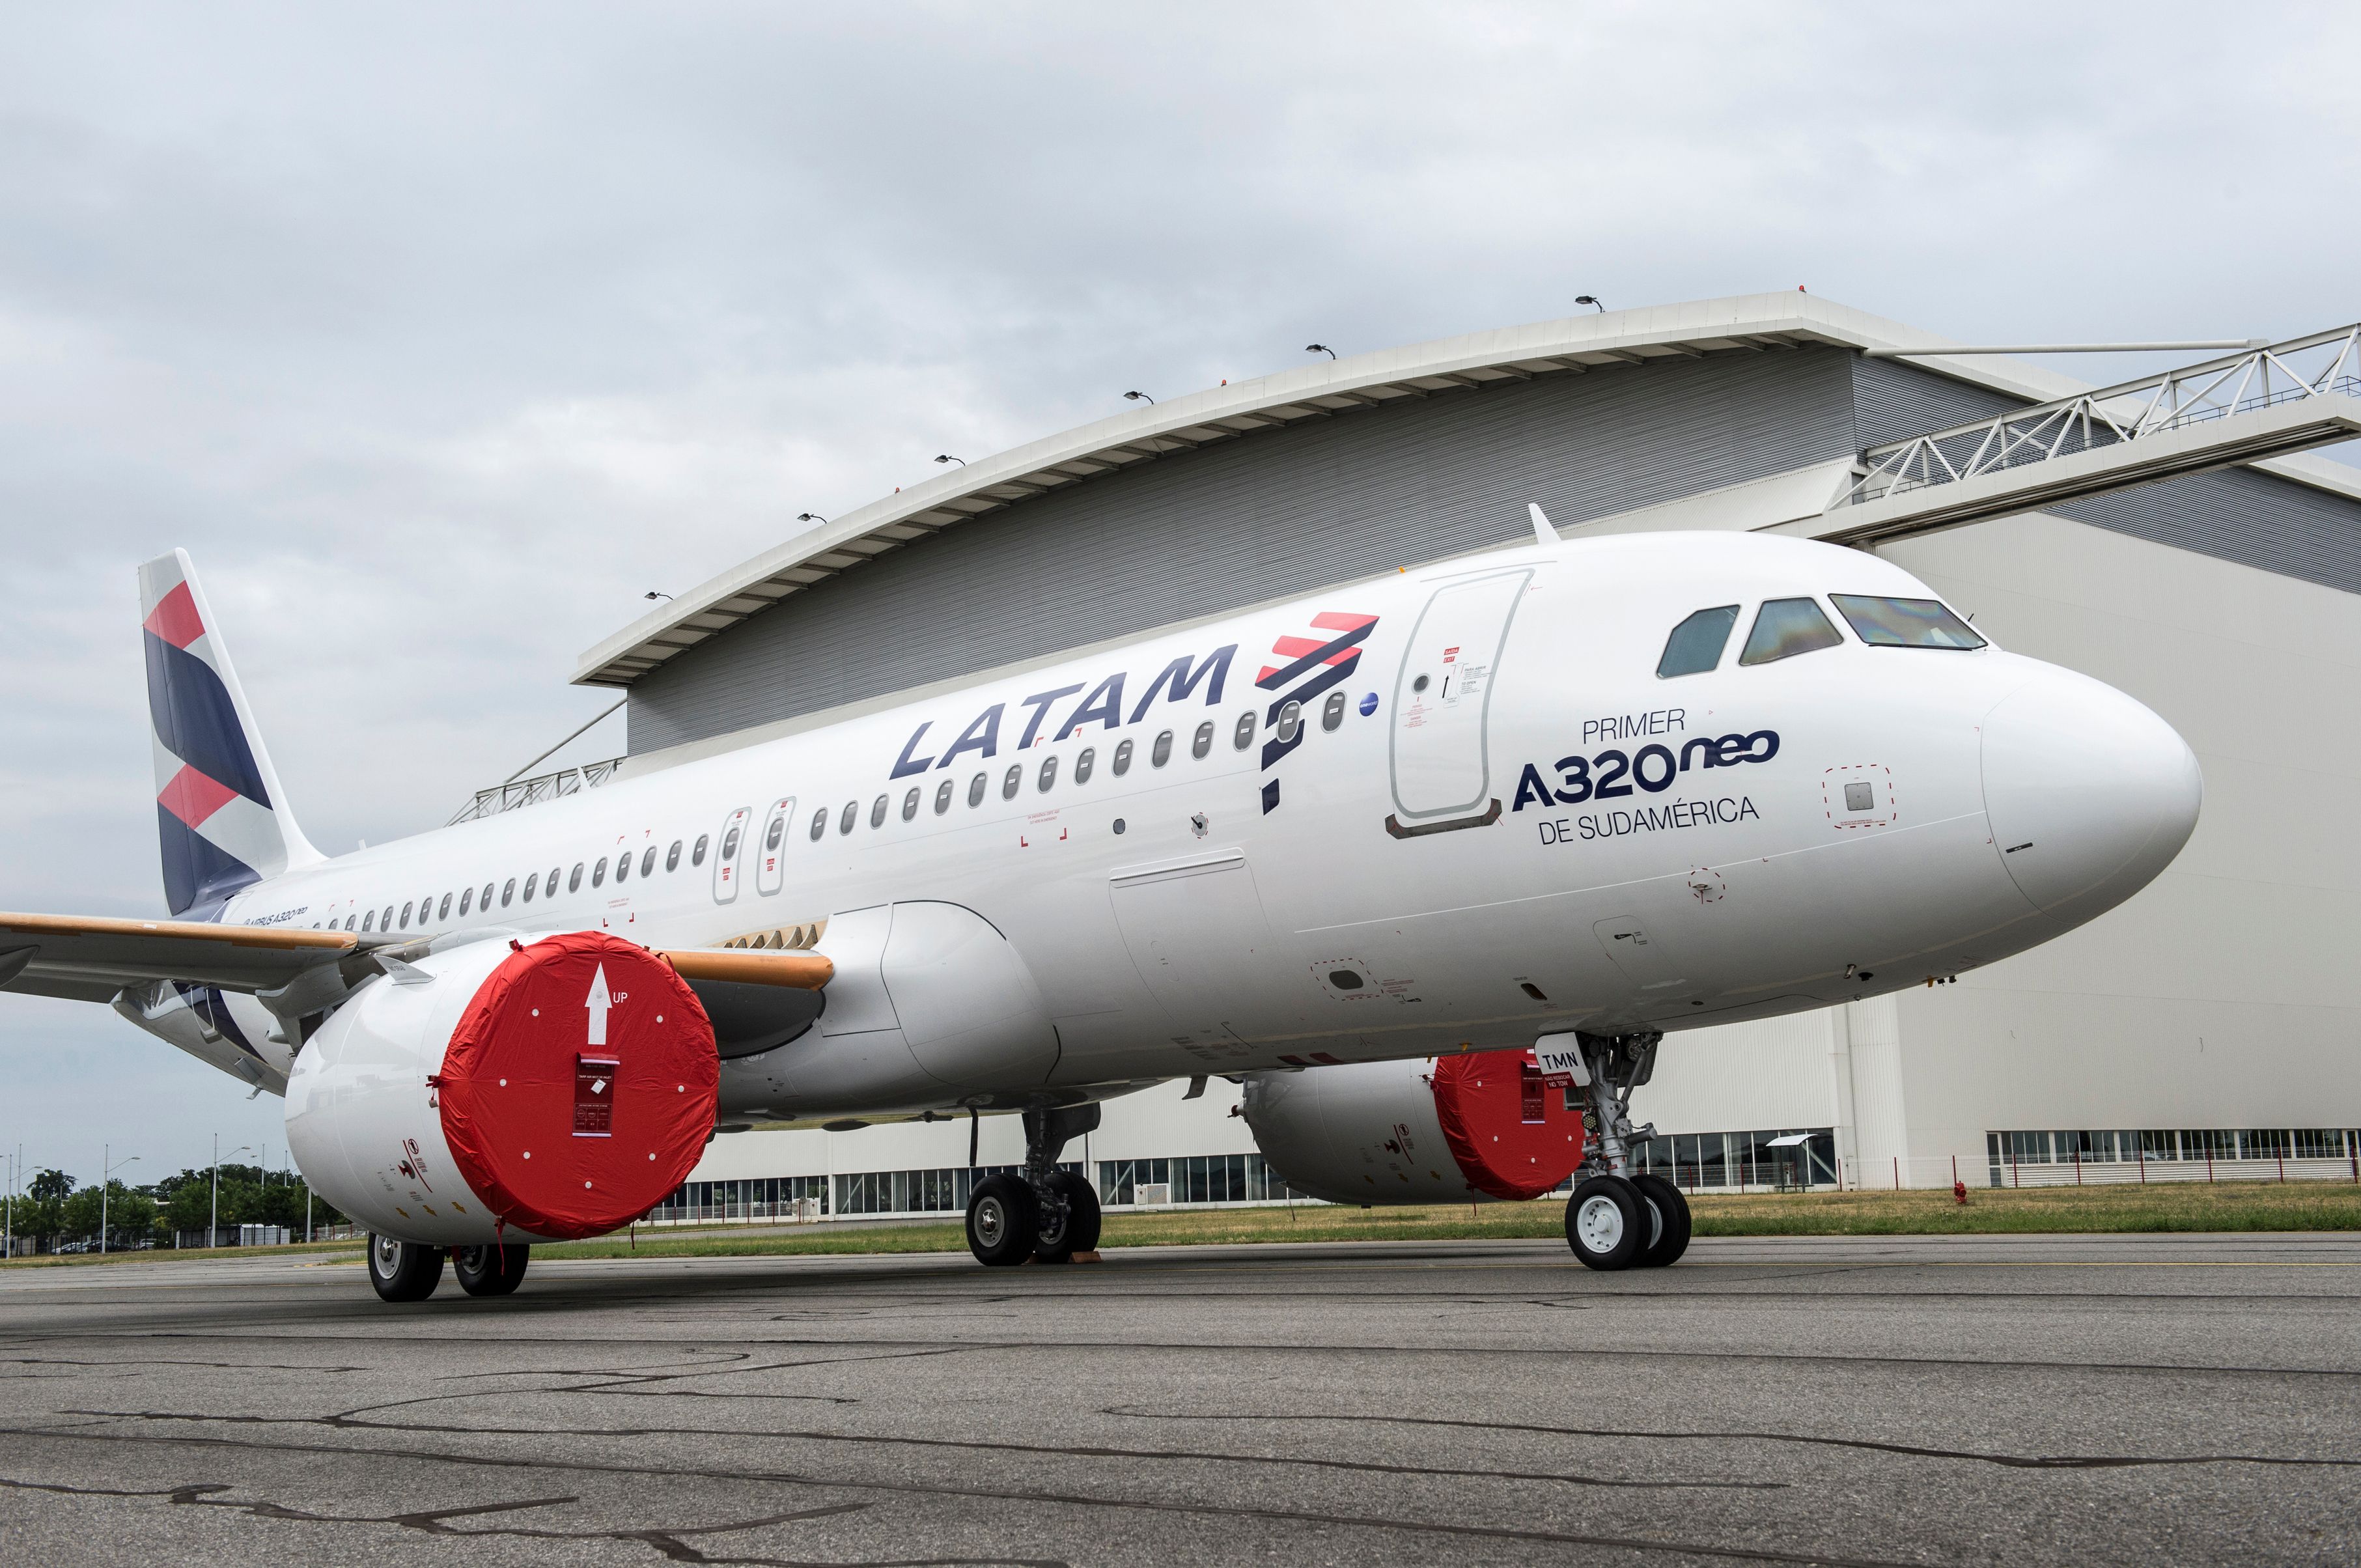 05_A320neo MSN7126 LATAM roll out-002